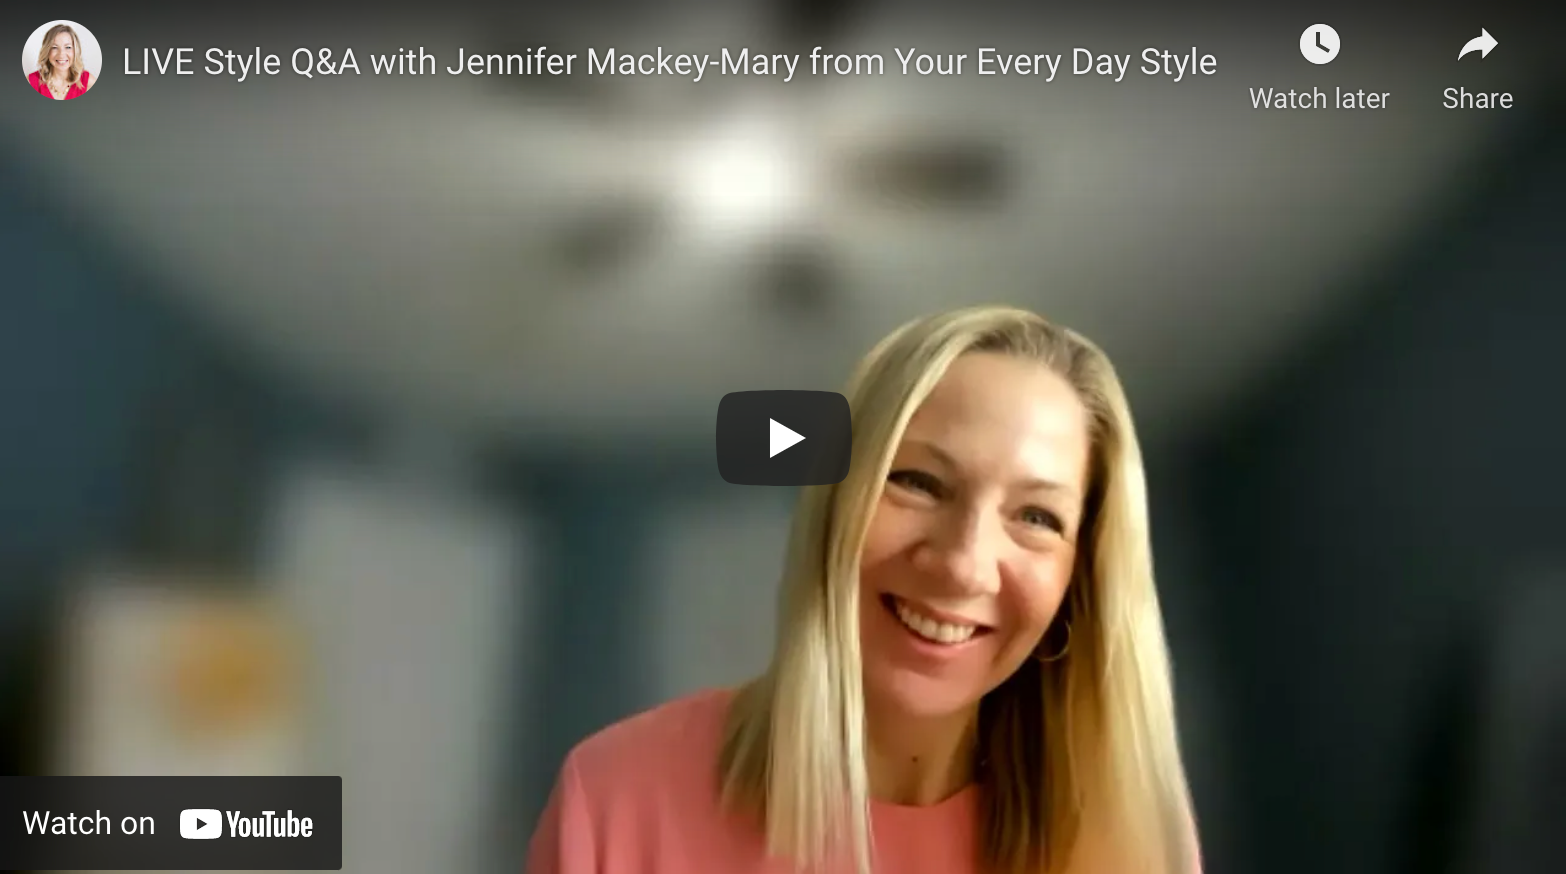 LIVE Style Q&A with Jennifer Mackey-Mary from Your Every Day Style